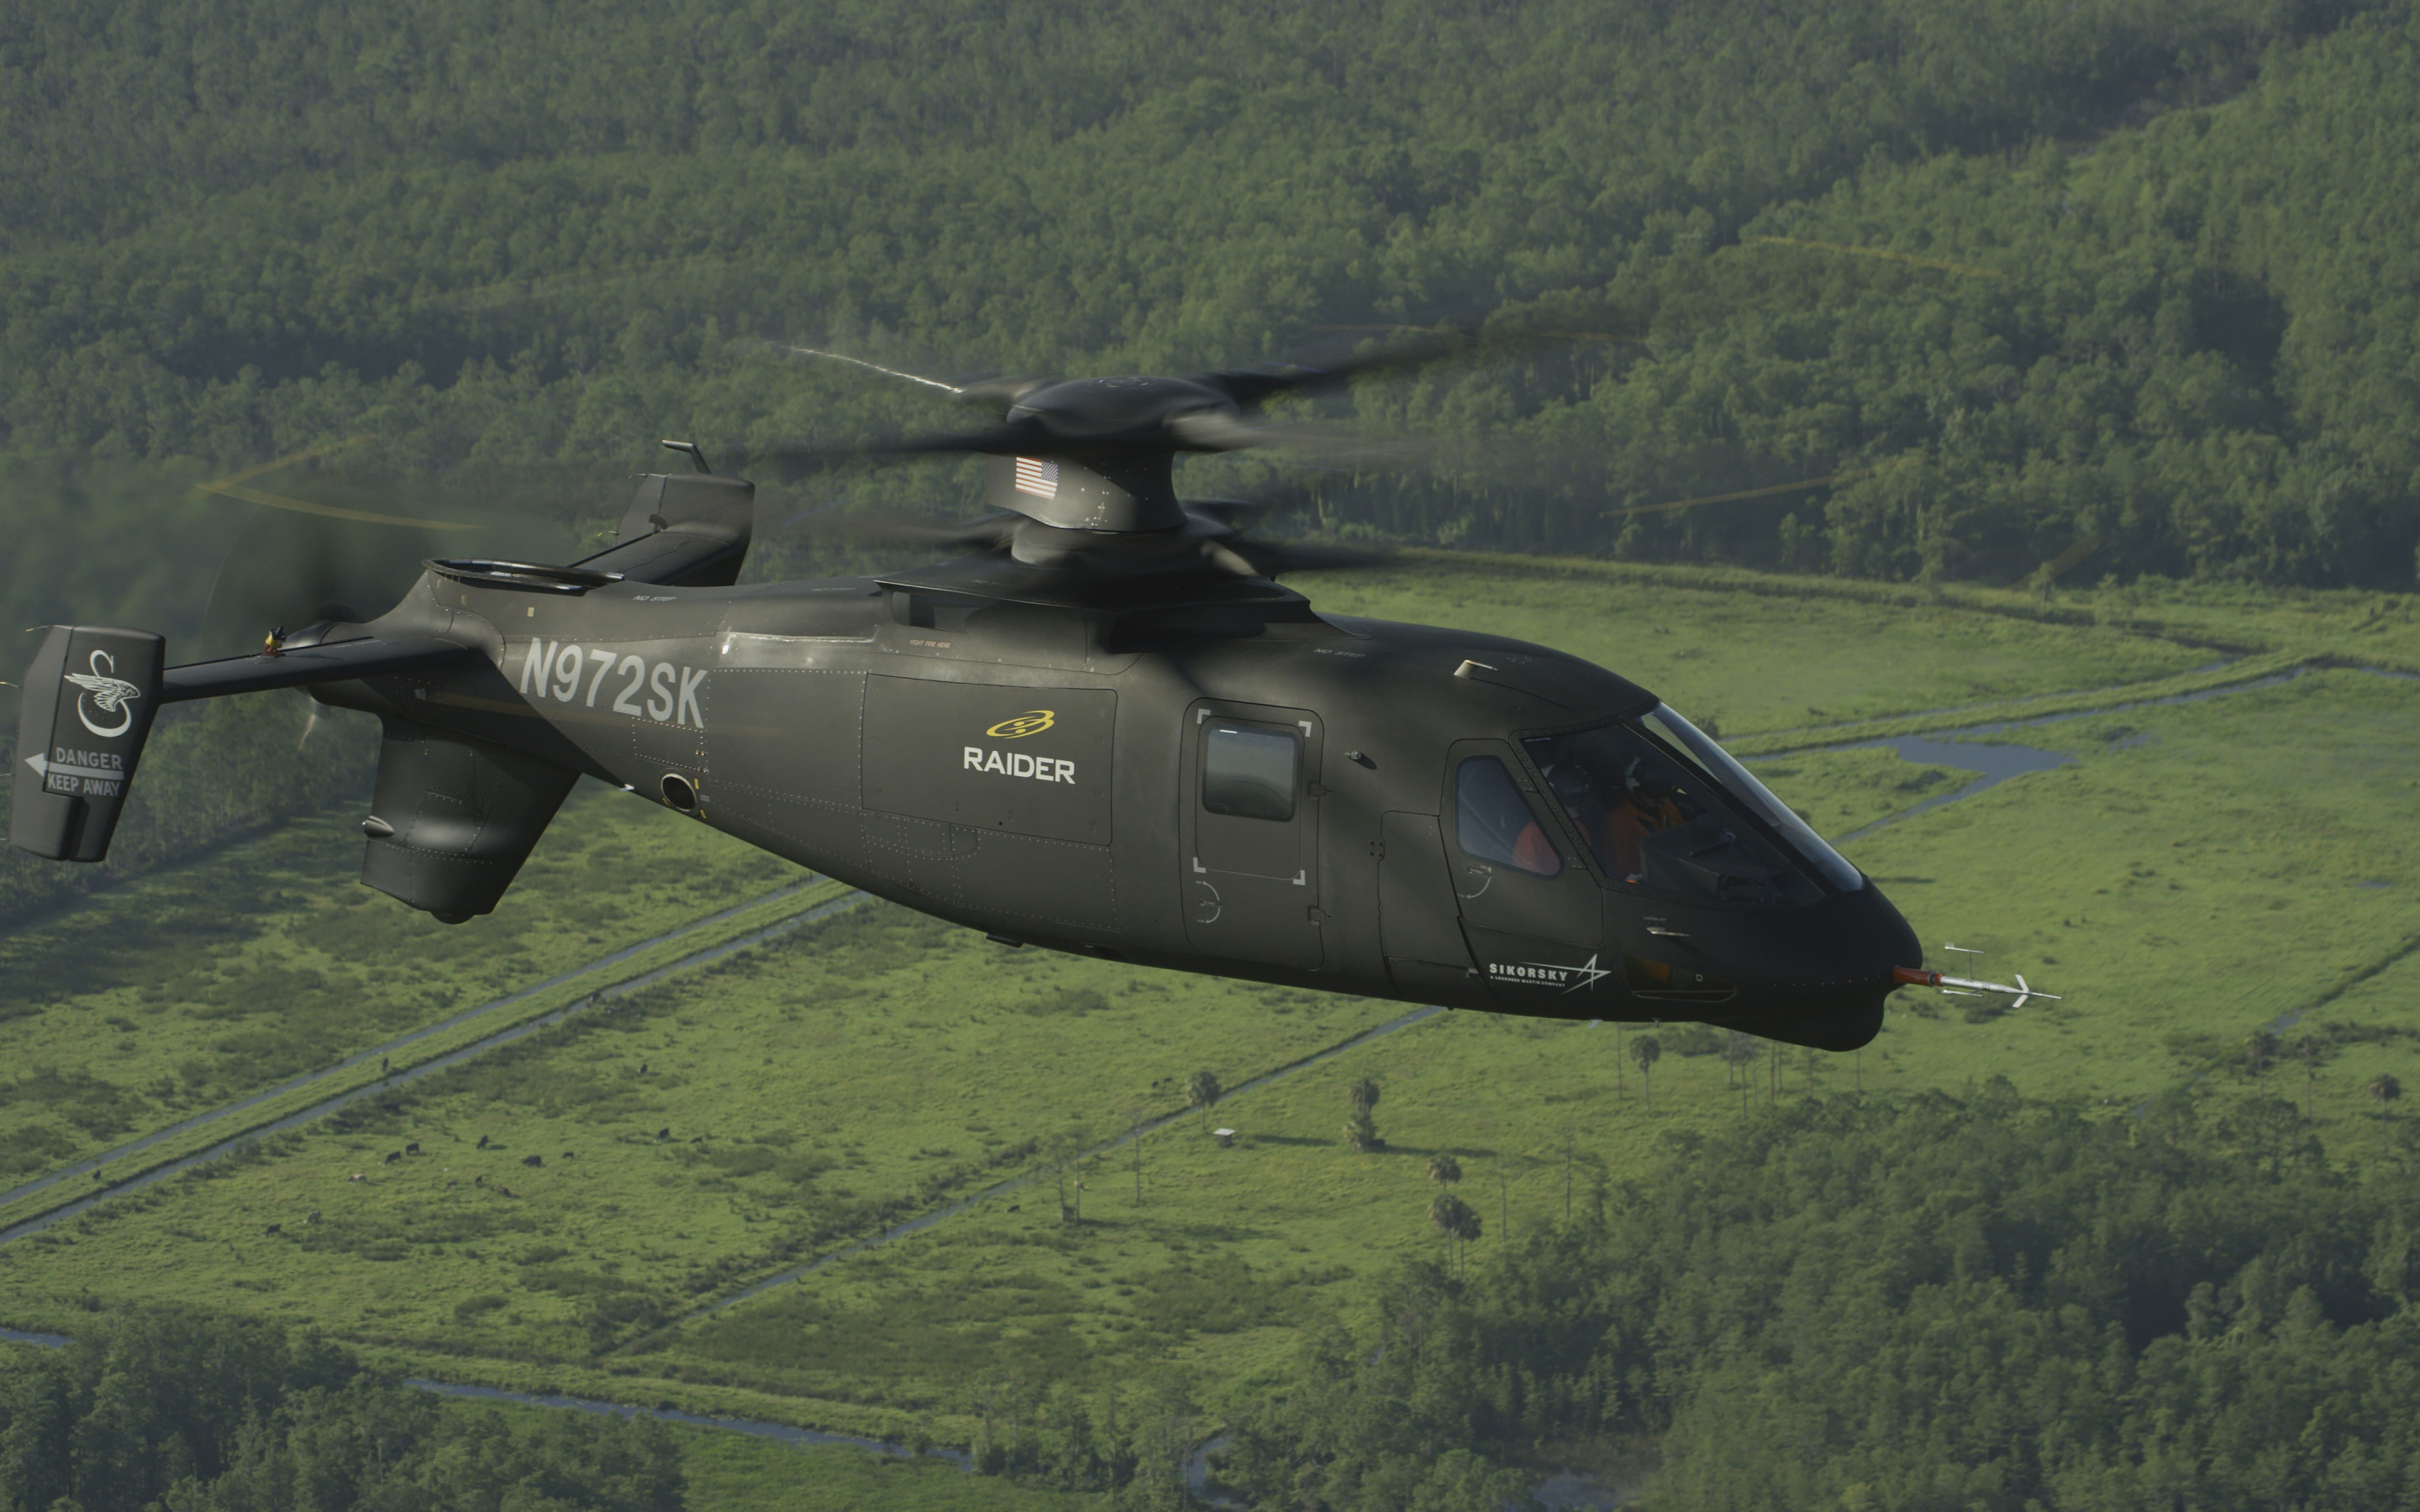 Sikorsky S-97 Raider, Attack helicopter, USA Sikorsky Aircraft, 2880x1800 HD Desktop